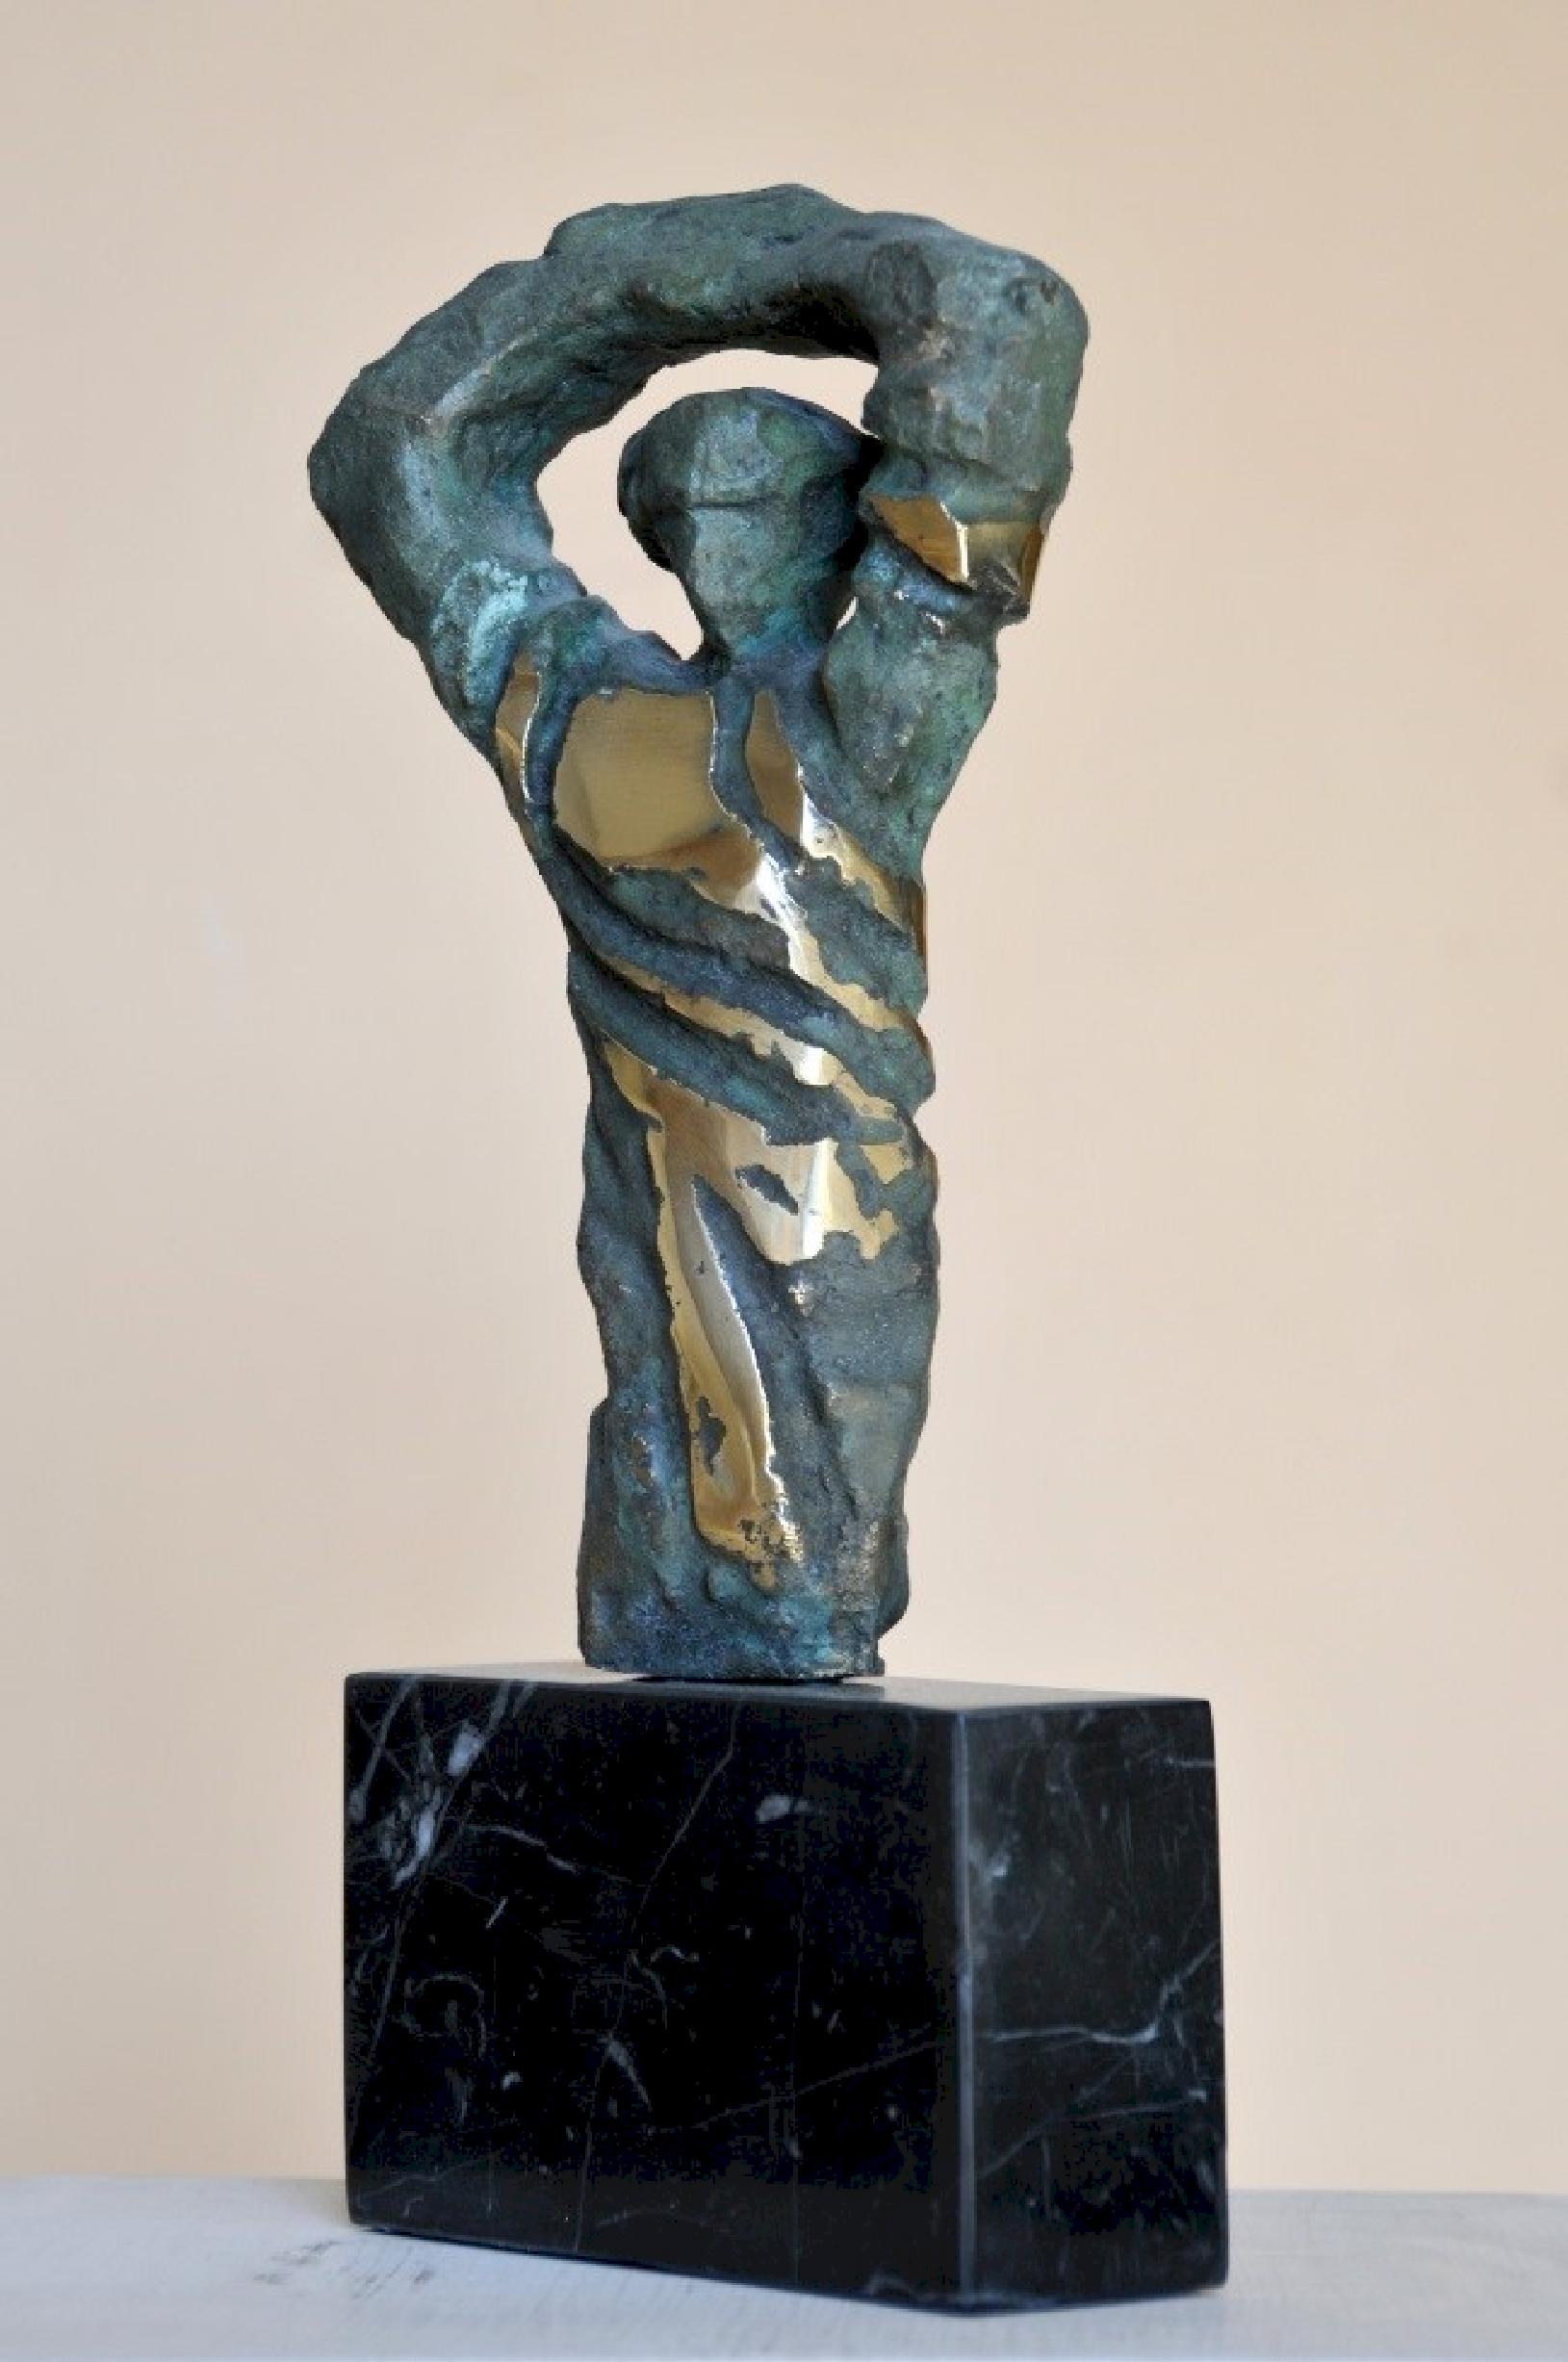 "Movement" Bronze Sculpture 5" x 4" x 2" inch by Sarkis Tossonian					

Sarkis Tossoonian was born in Alexandria in 1953. He graduated from the Faculty of Fine Arts/Sculpture in 1979. He started exhibiting in individual and group exhibitions in